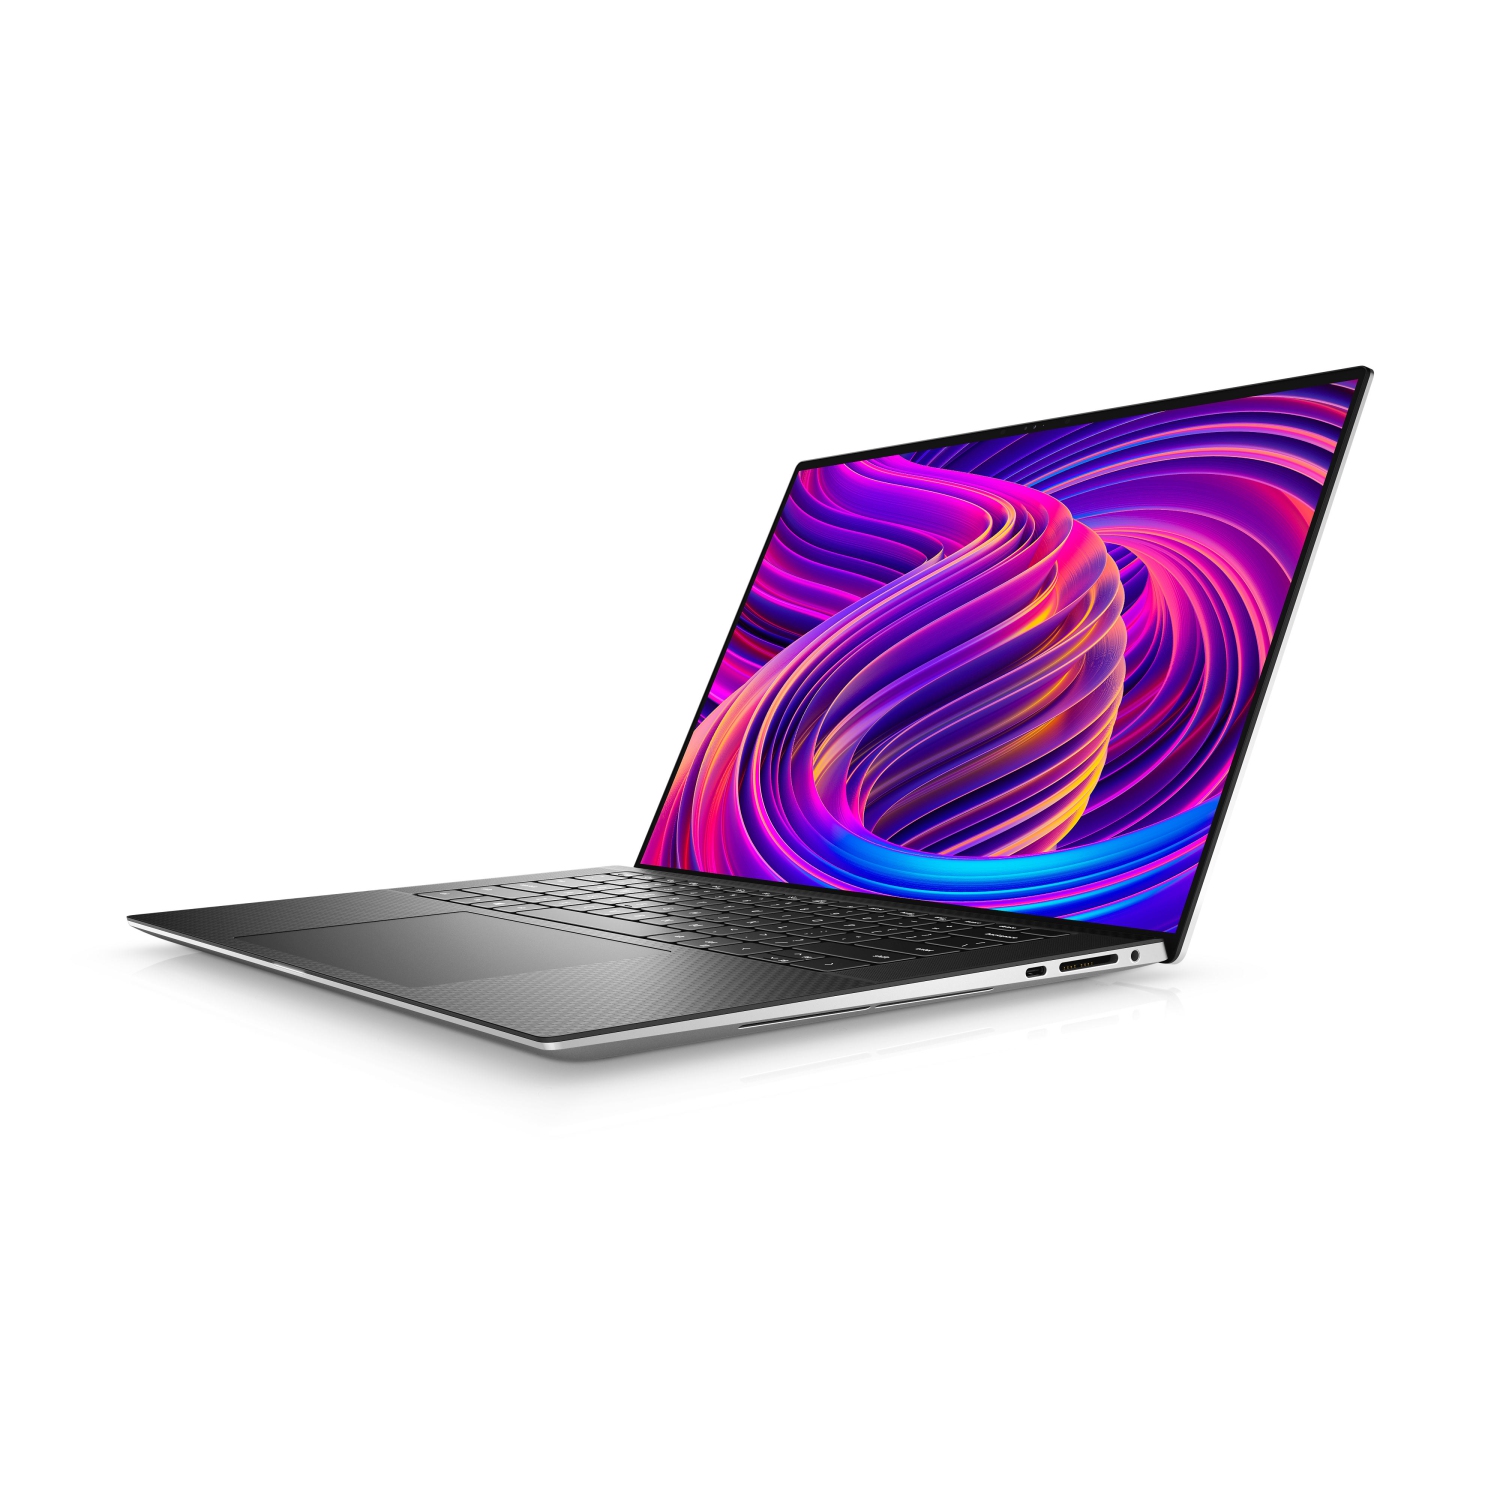 Refurbished (Excellent) - Dell XPS 15 9510 Laptop (2021), 15.6" 4K Touch, Core i9 - 2TB SSD - 16GB RAM - 3050 Ti, 8 Cores @ 4.9 GHz - 11th Gen CPU Certified Refurbished